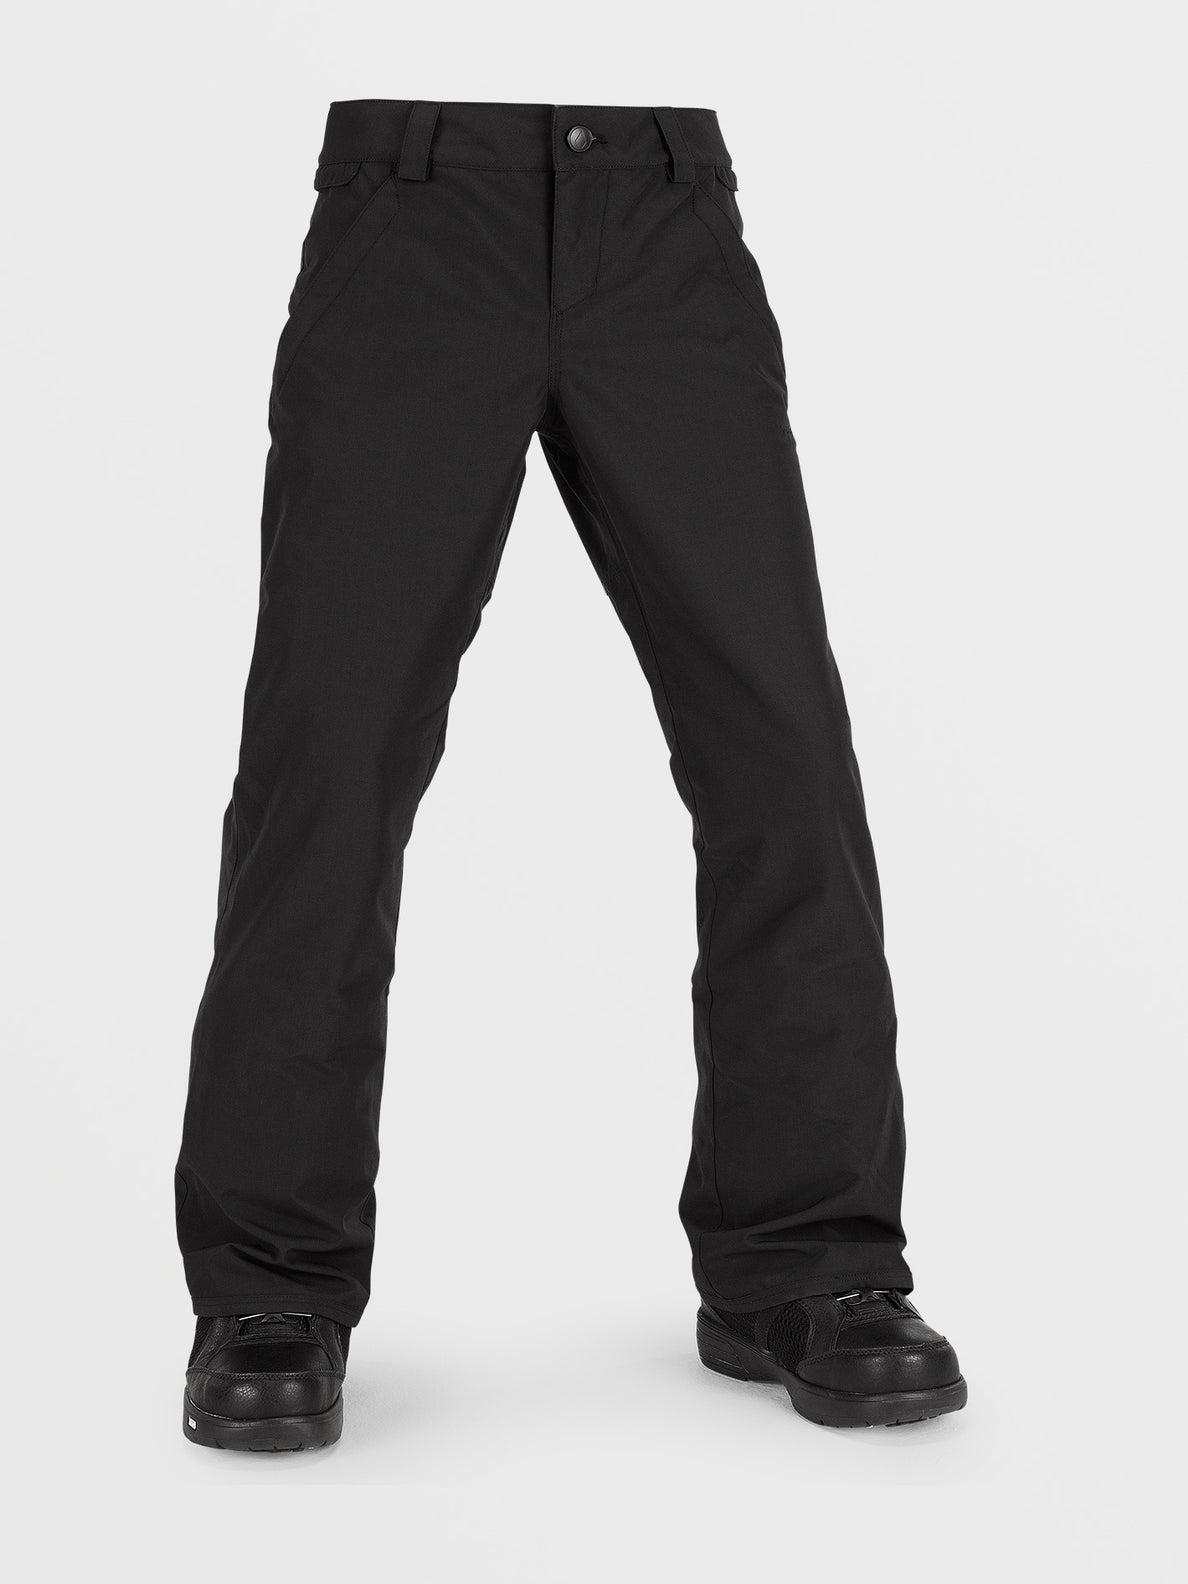 Kids Frochickidee Insulated Pants - Black